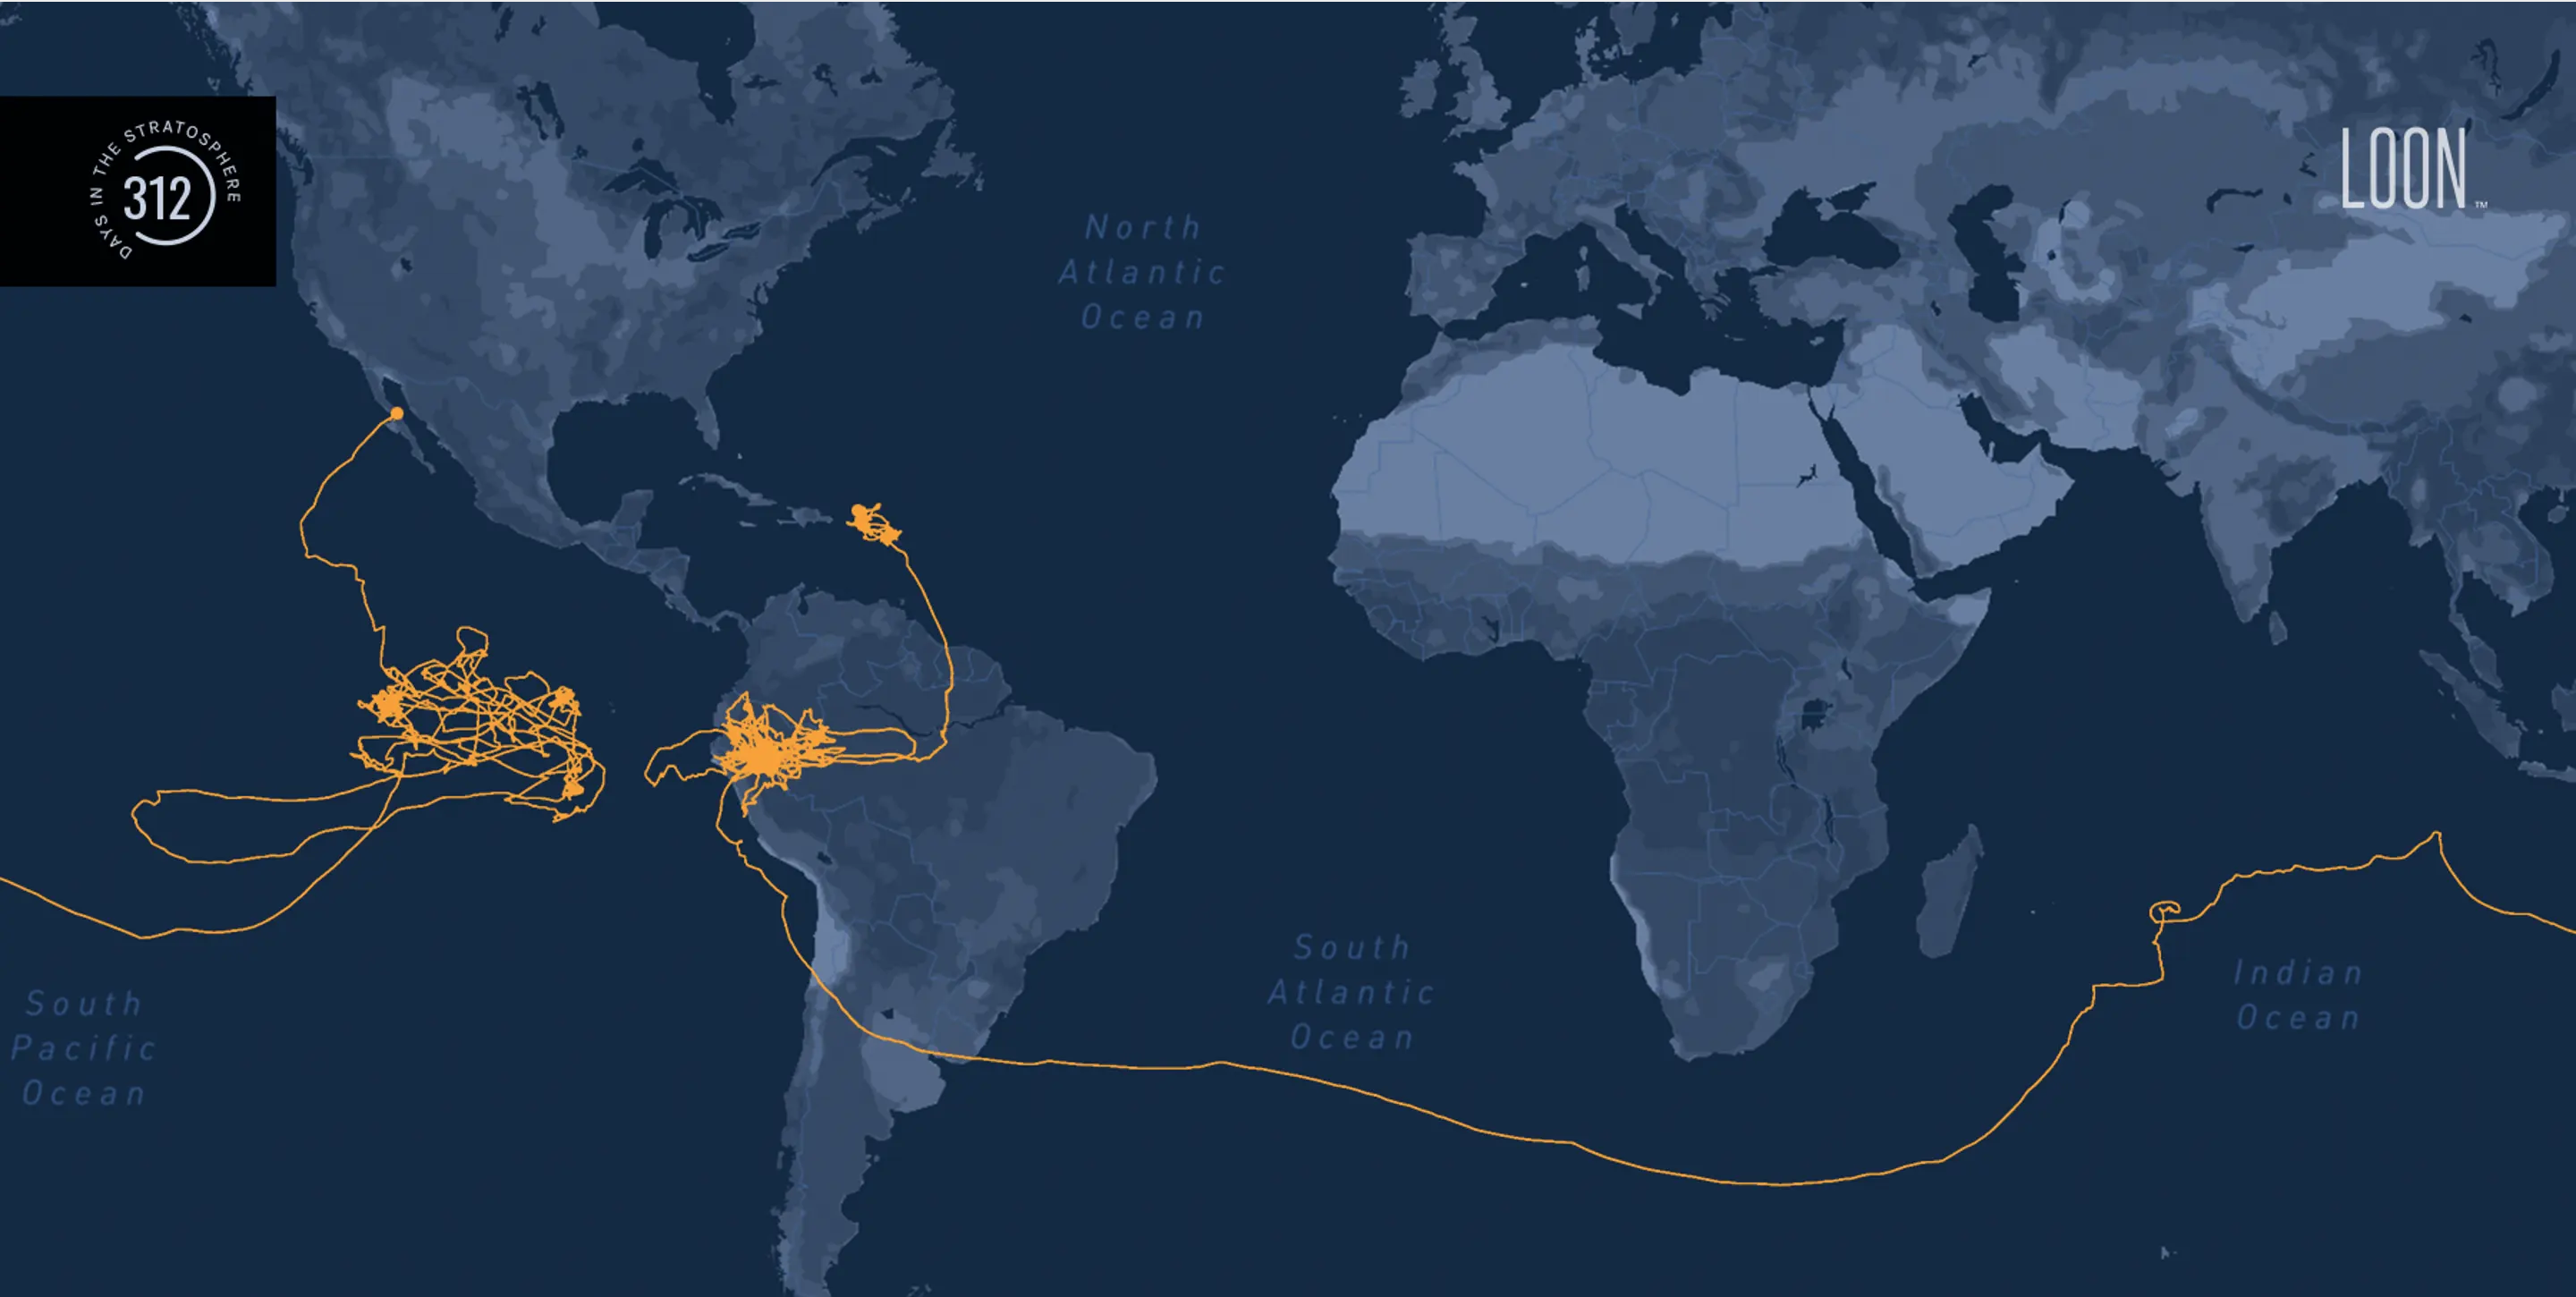 Loon's record breaking 312 day flight path